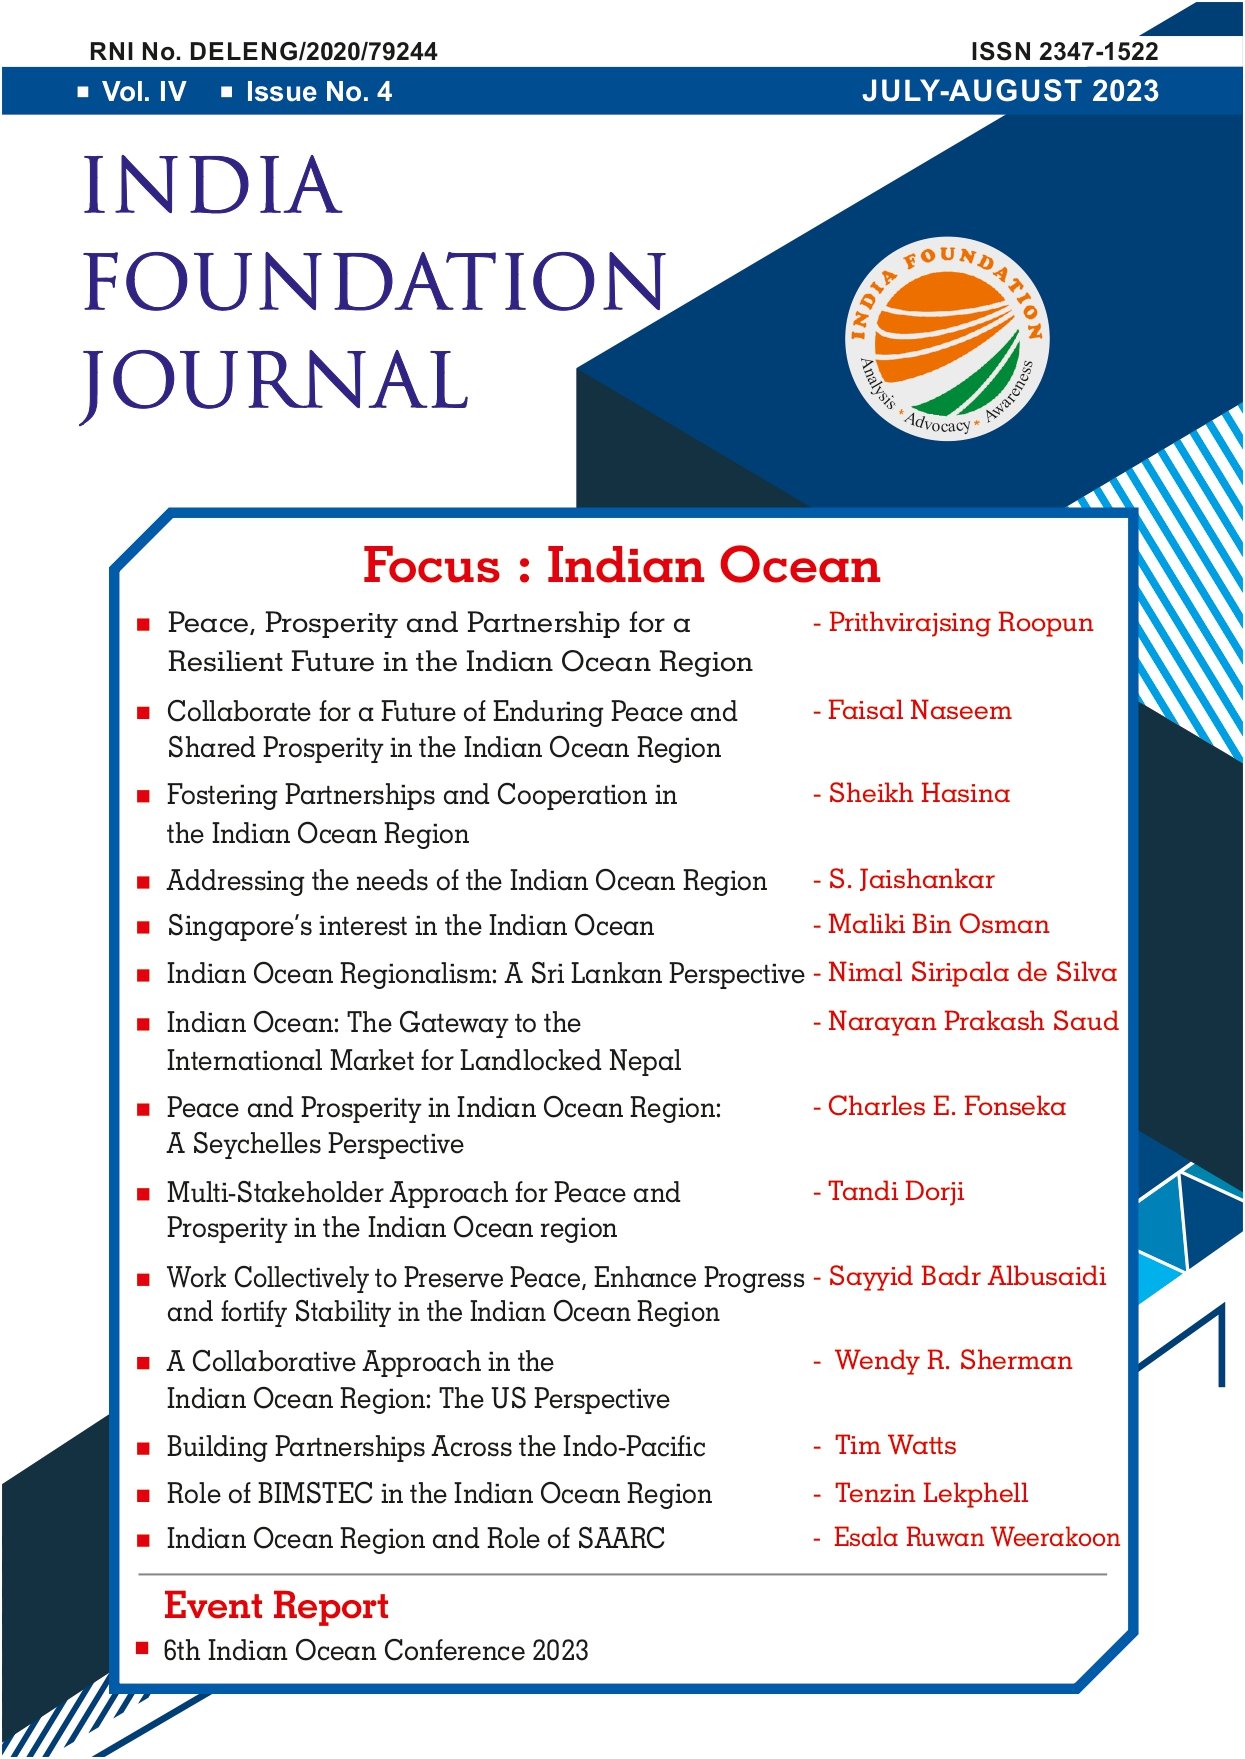 India Foundation Journal: July-August 2023